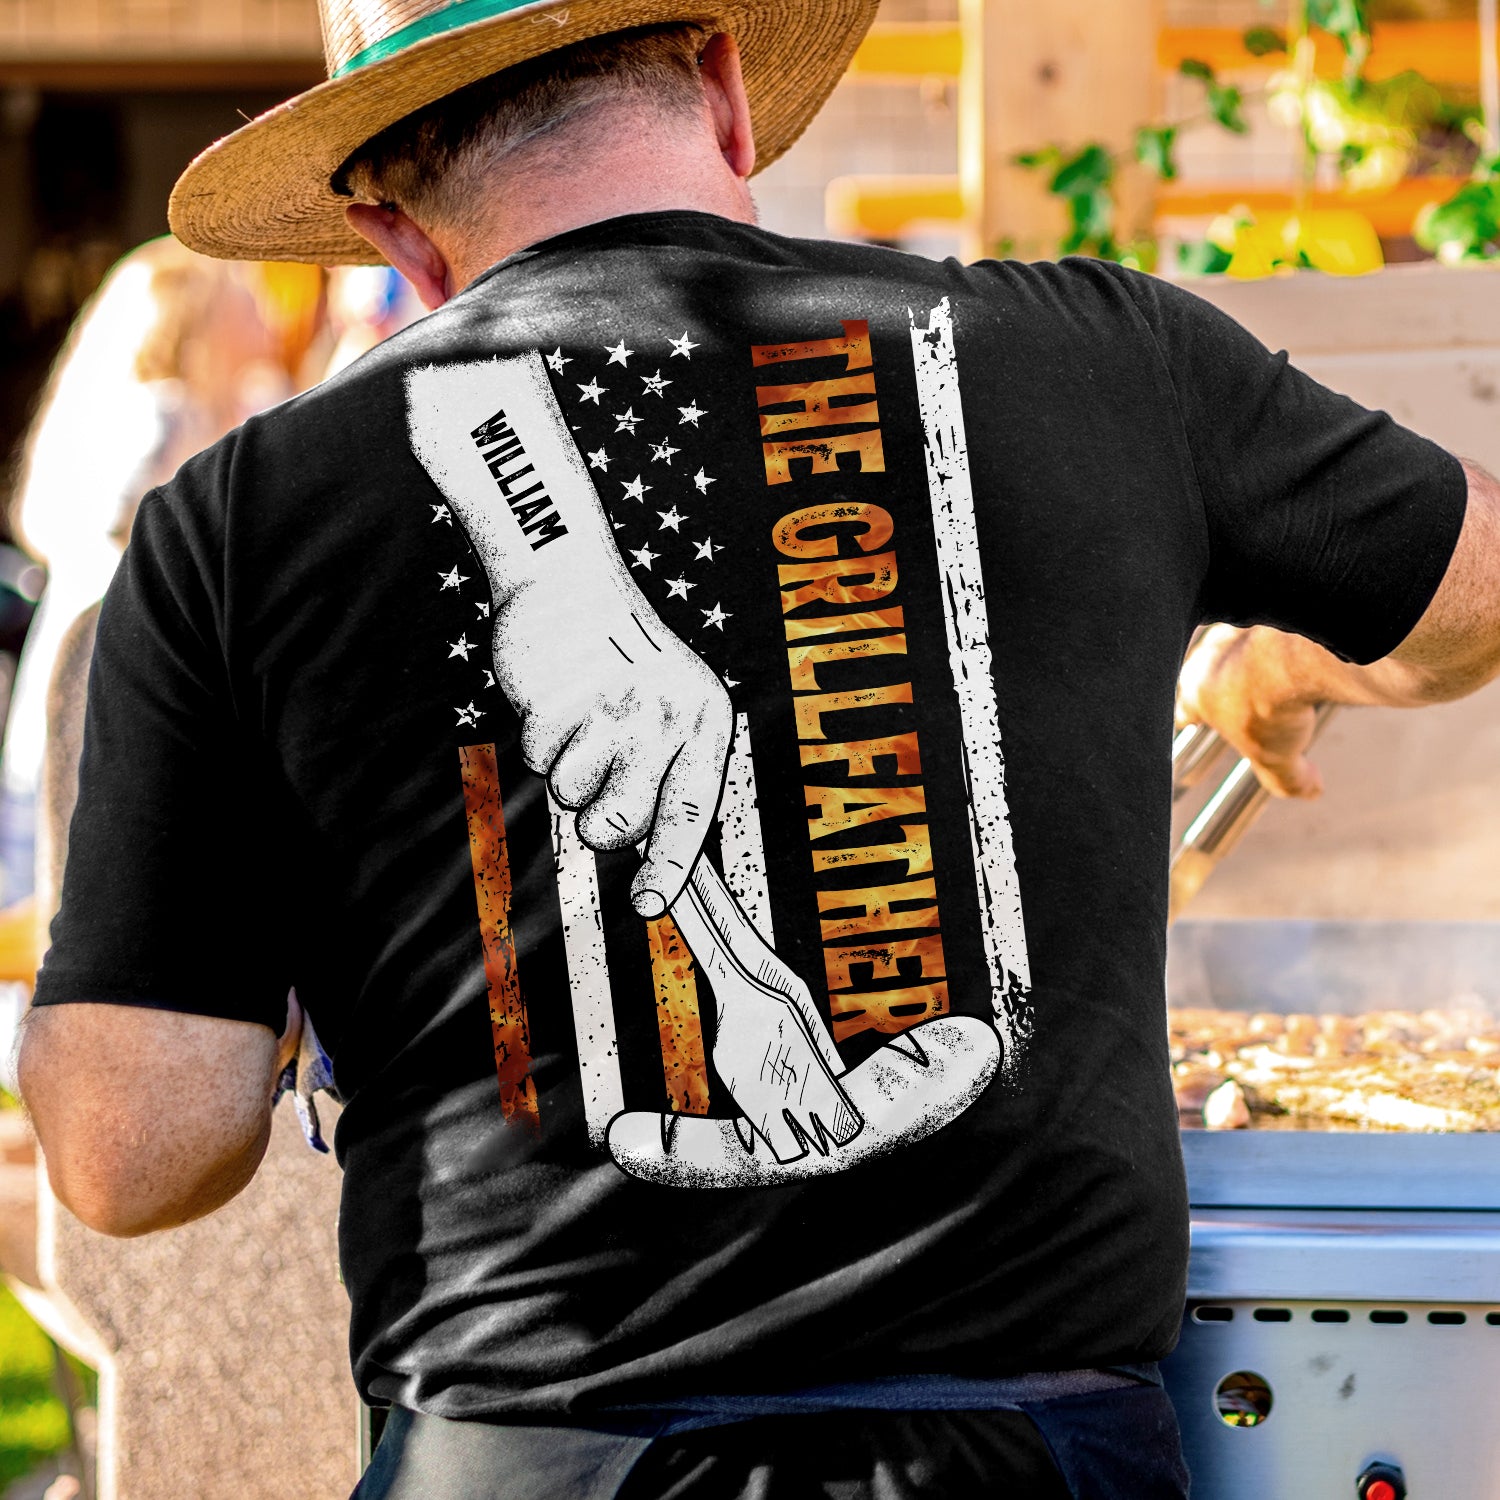 The Grillfather - Personalized Back Printed T Shirt